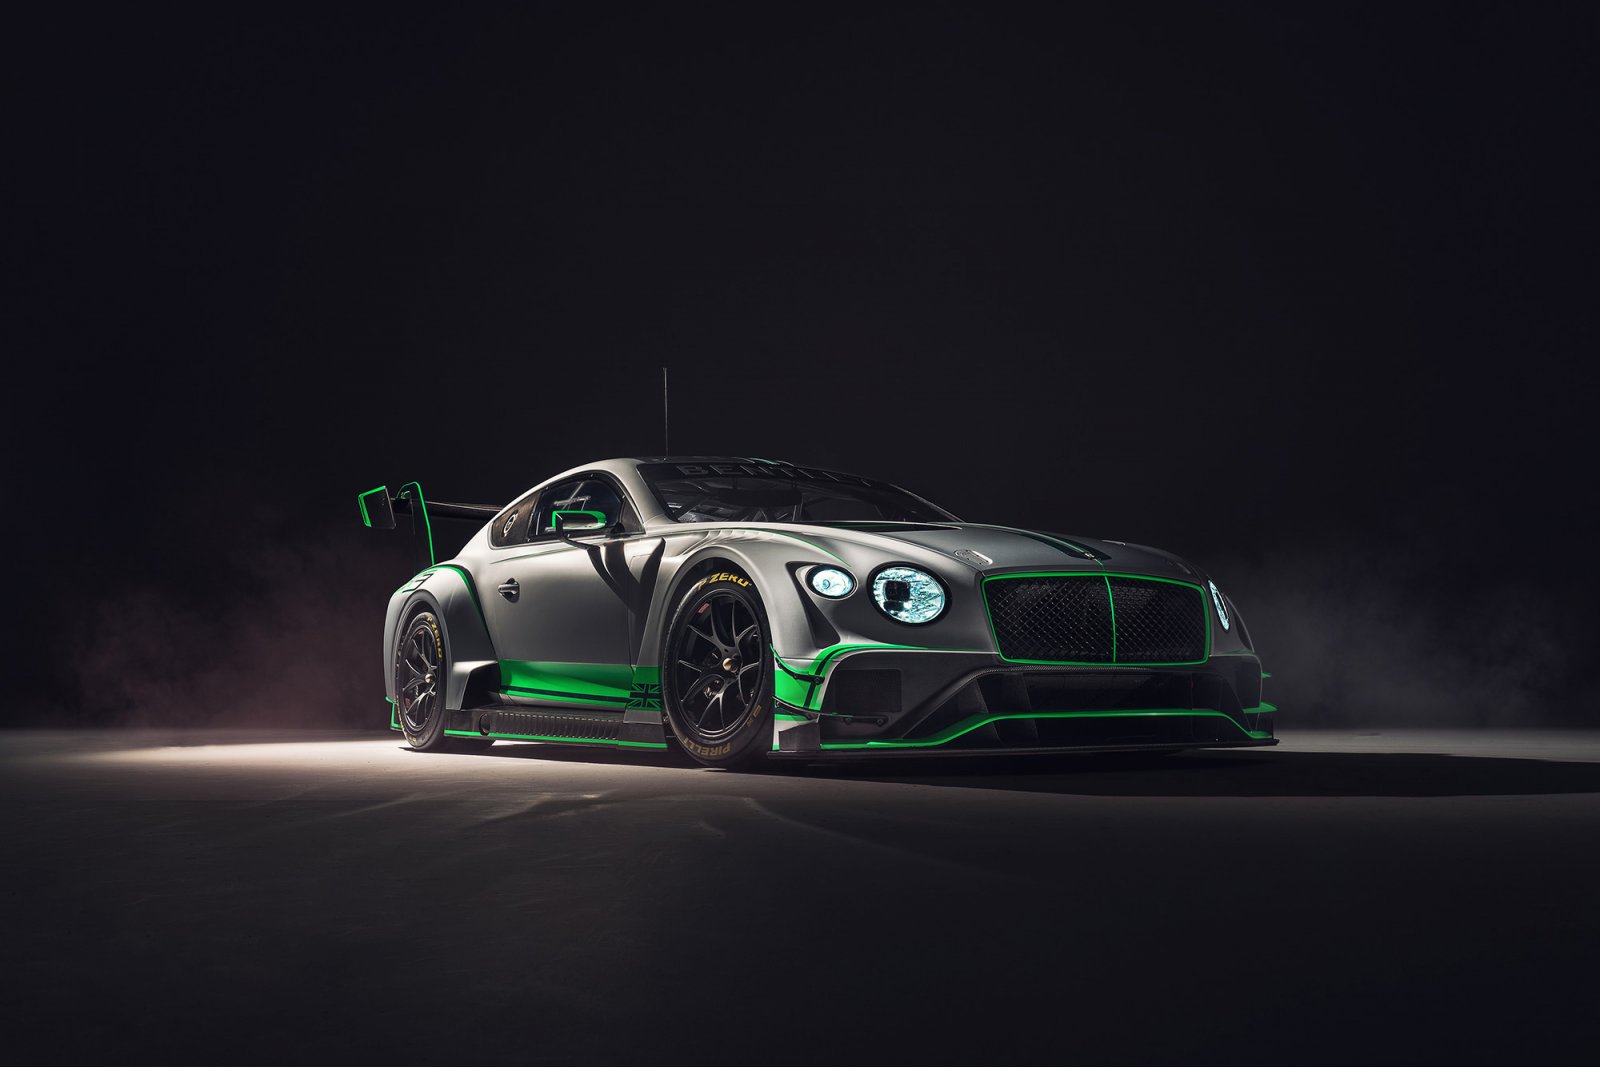 Bentley unveils new Continental GT3 for 2018 Blancpain GT Series and Total 24 Hours of Spa